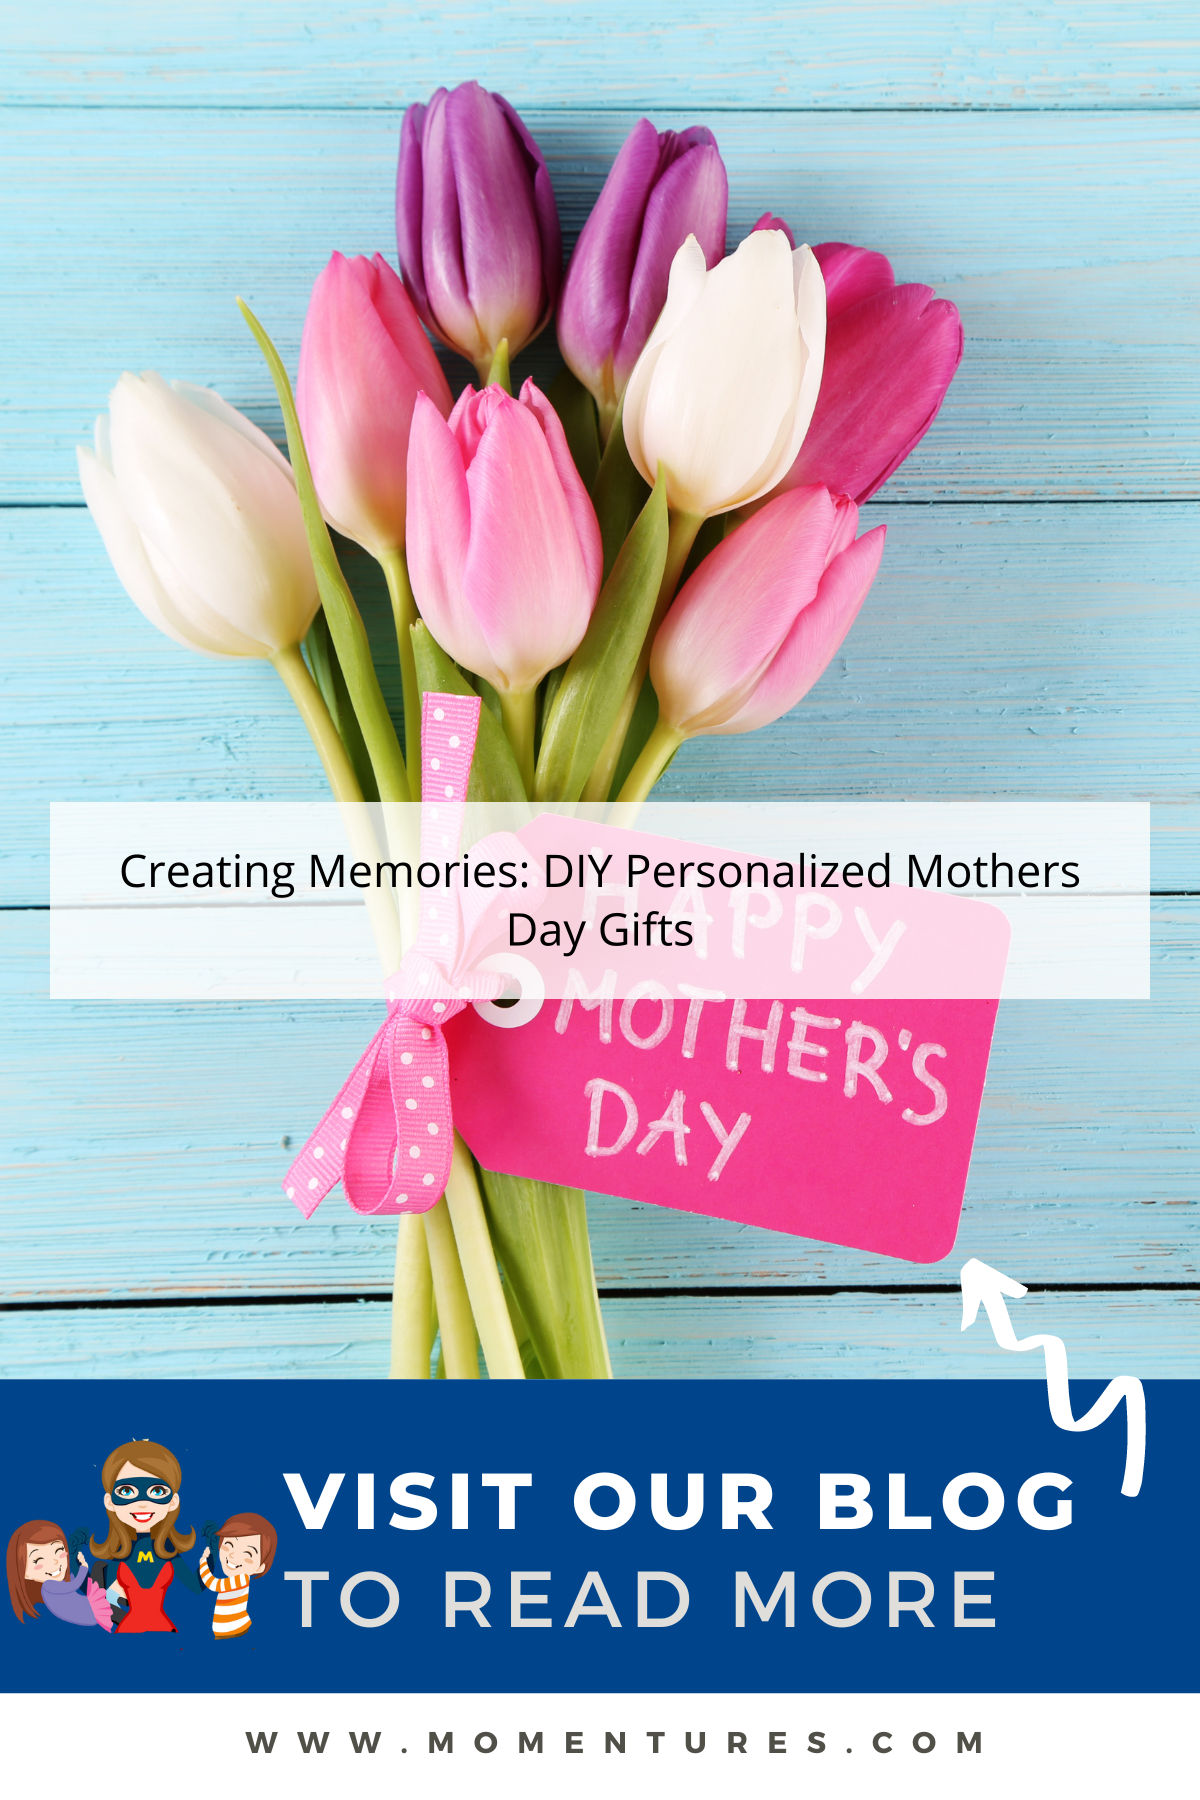 Creating Memories: DIY Personalized Mothers Day Gifts